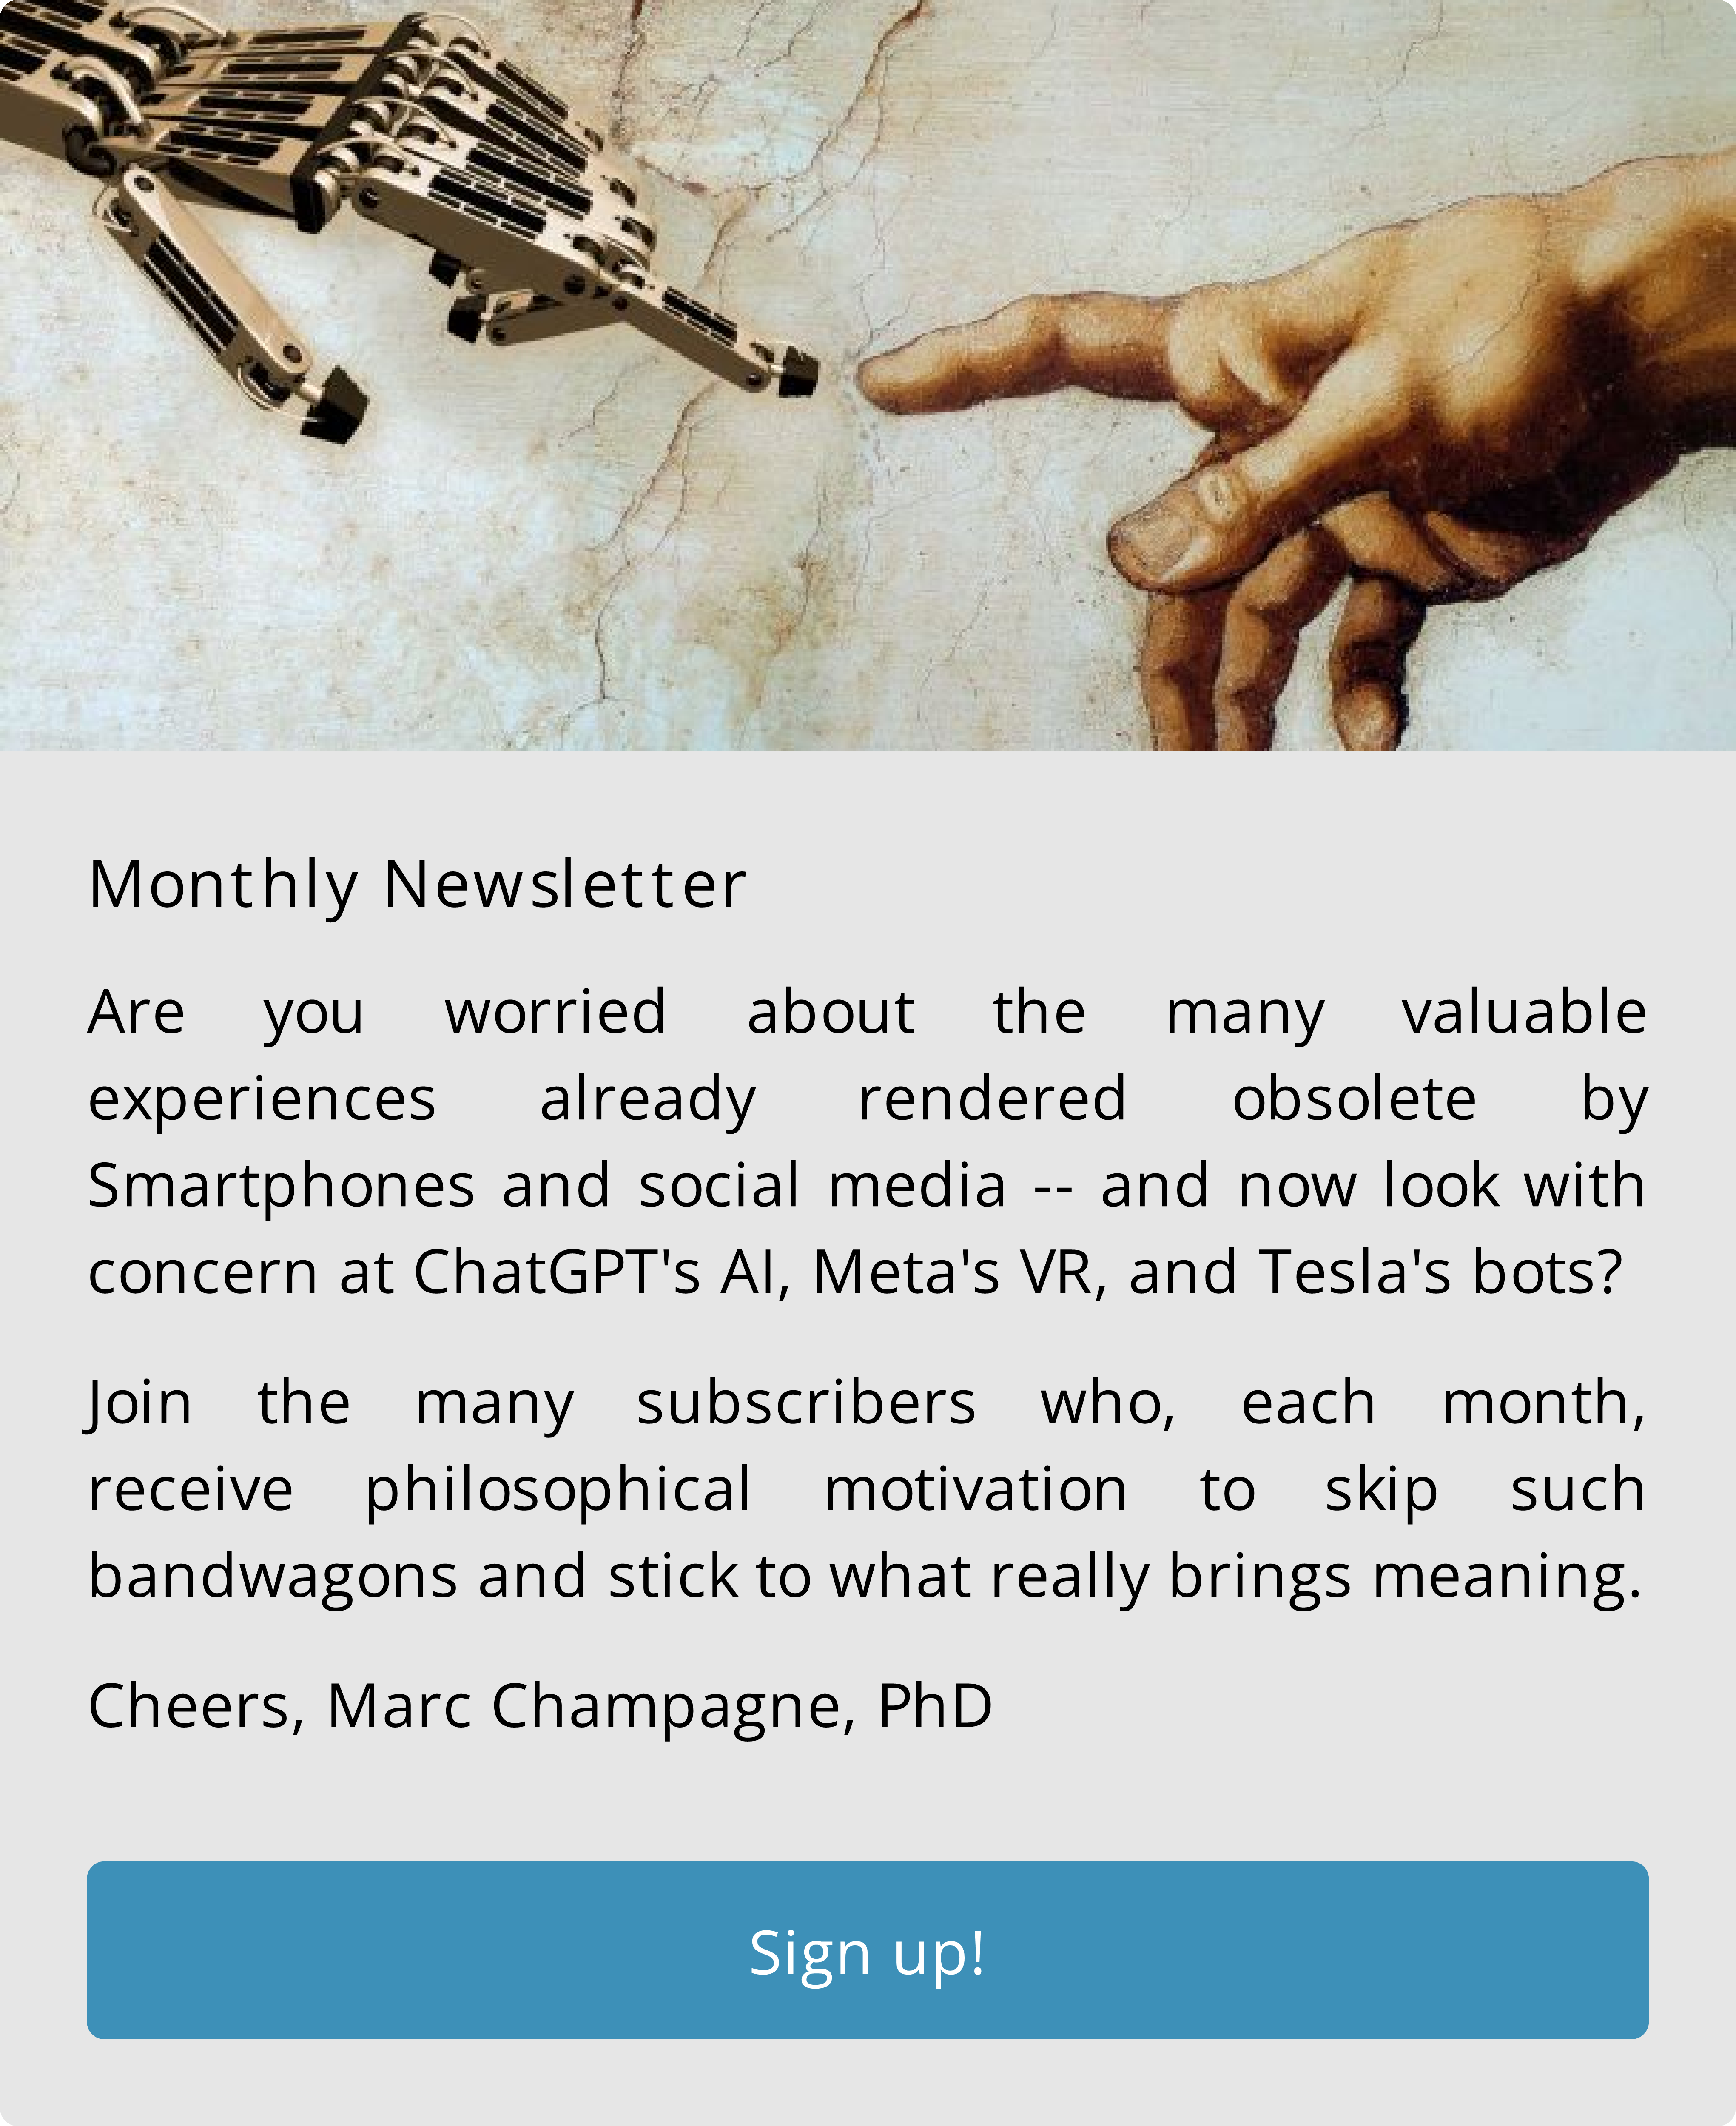 Philosophy of Technology Newsletter sign-up